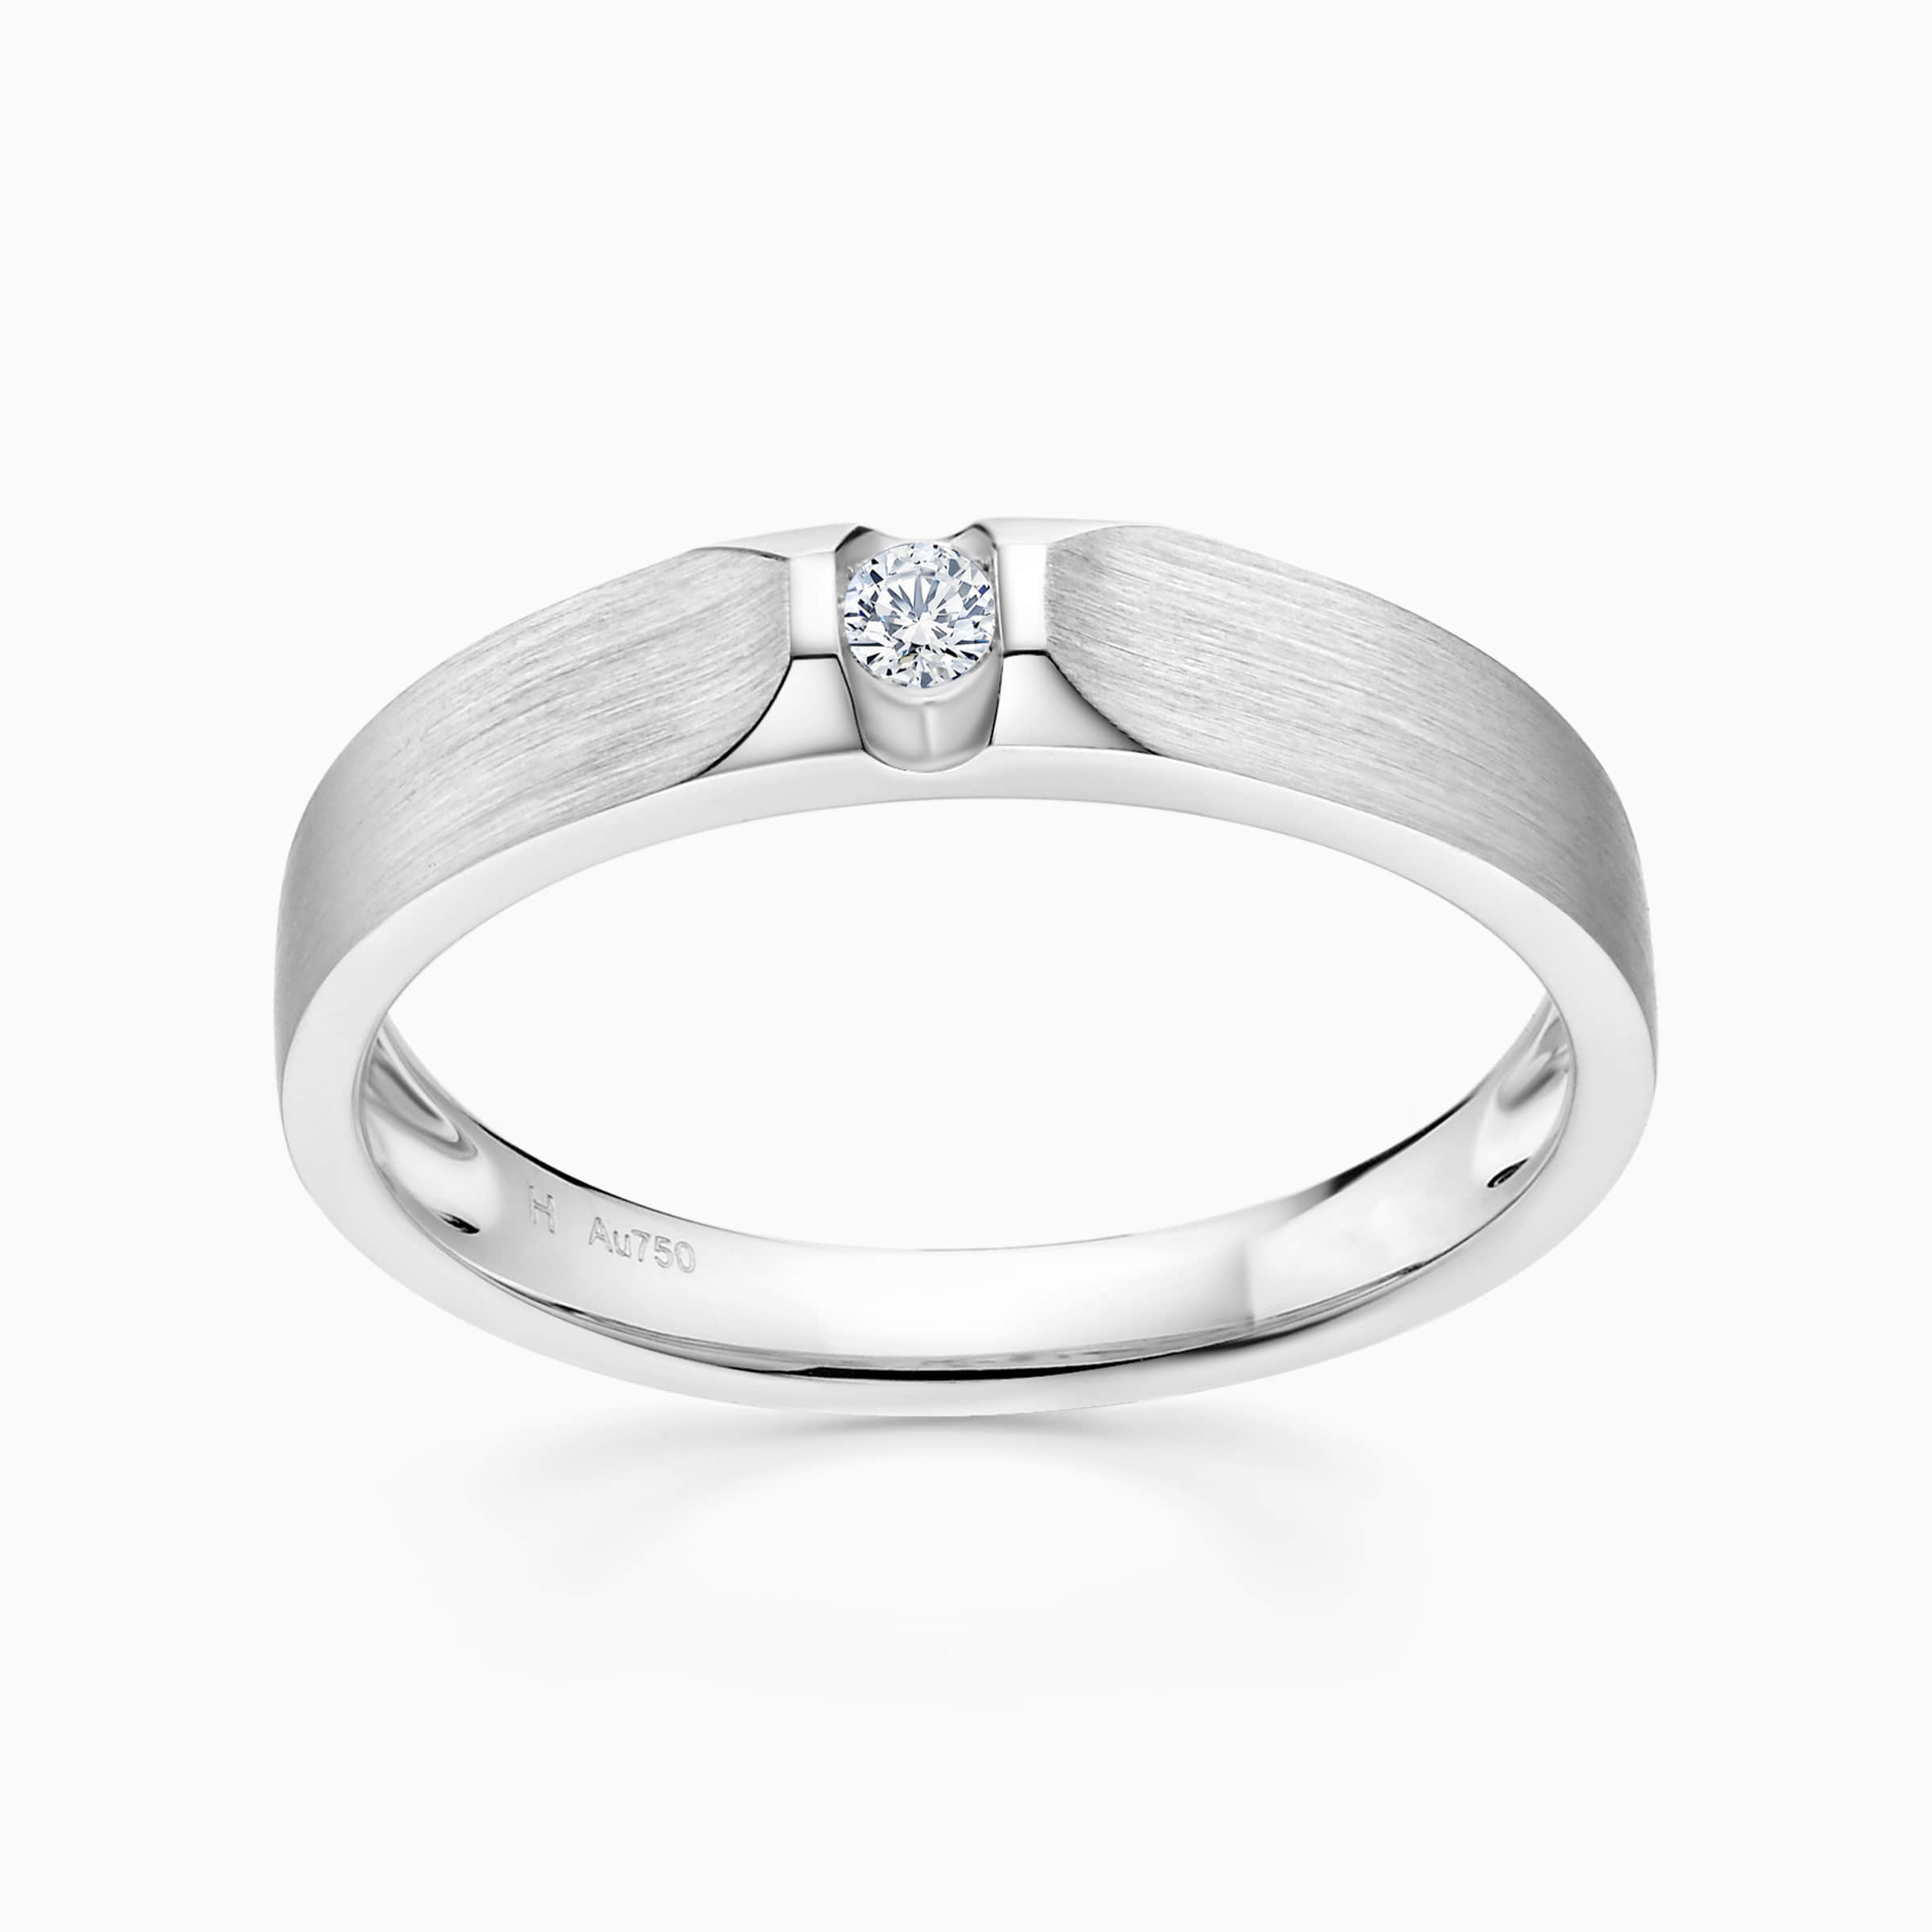 Darry Ring male wedding band in platinum